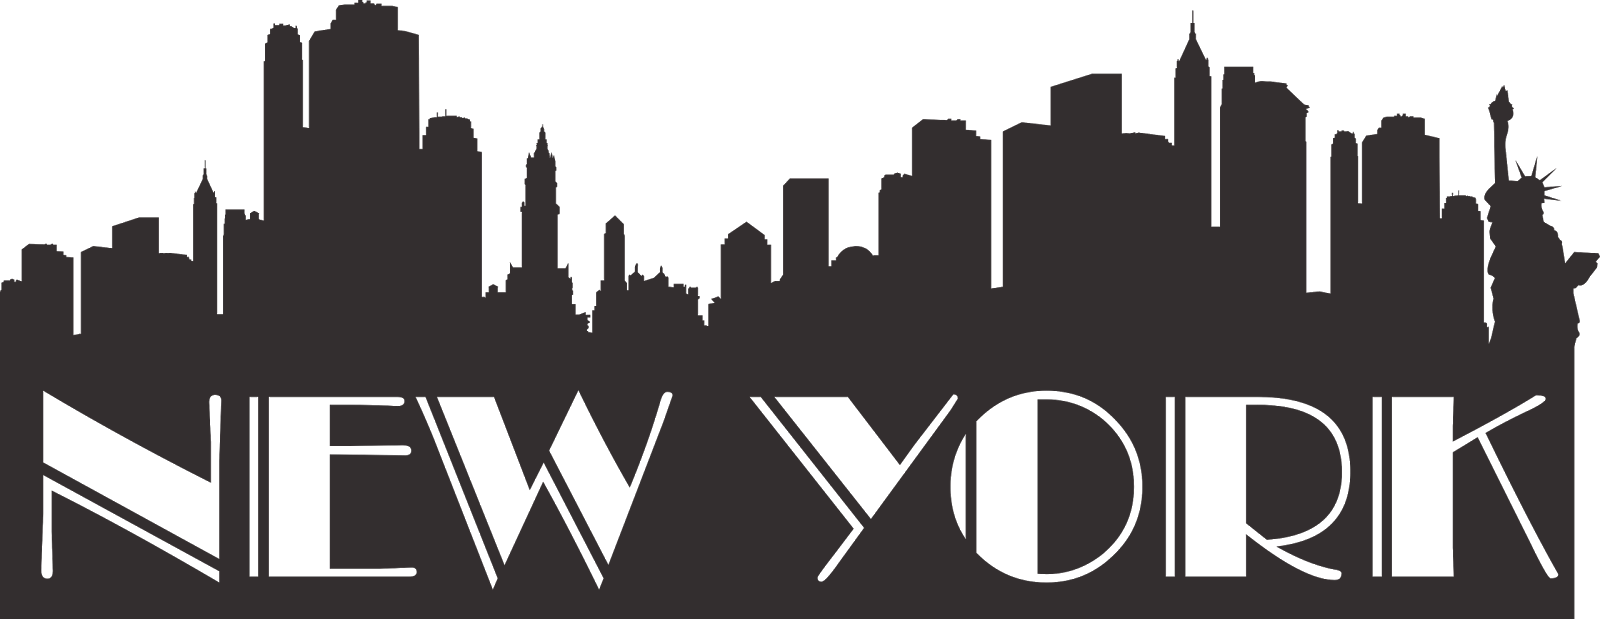 Download PNG image - New York Cityscape PNG Image 